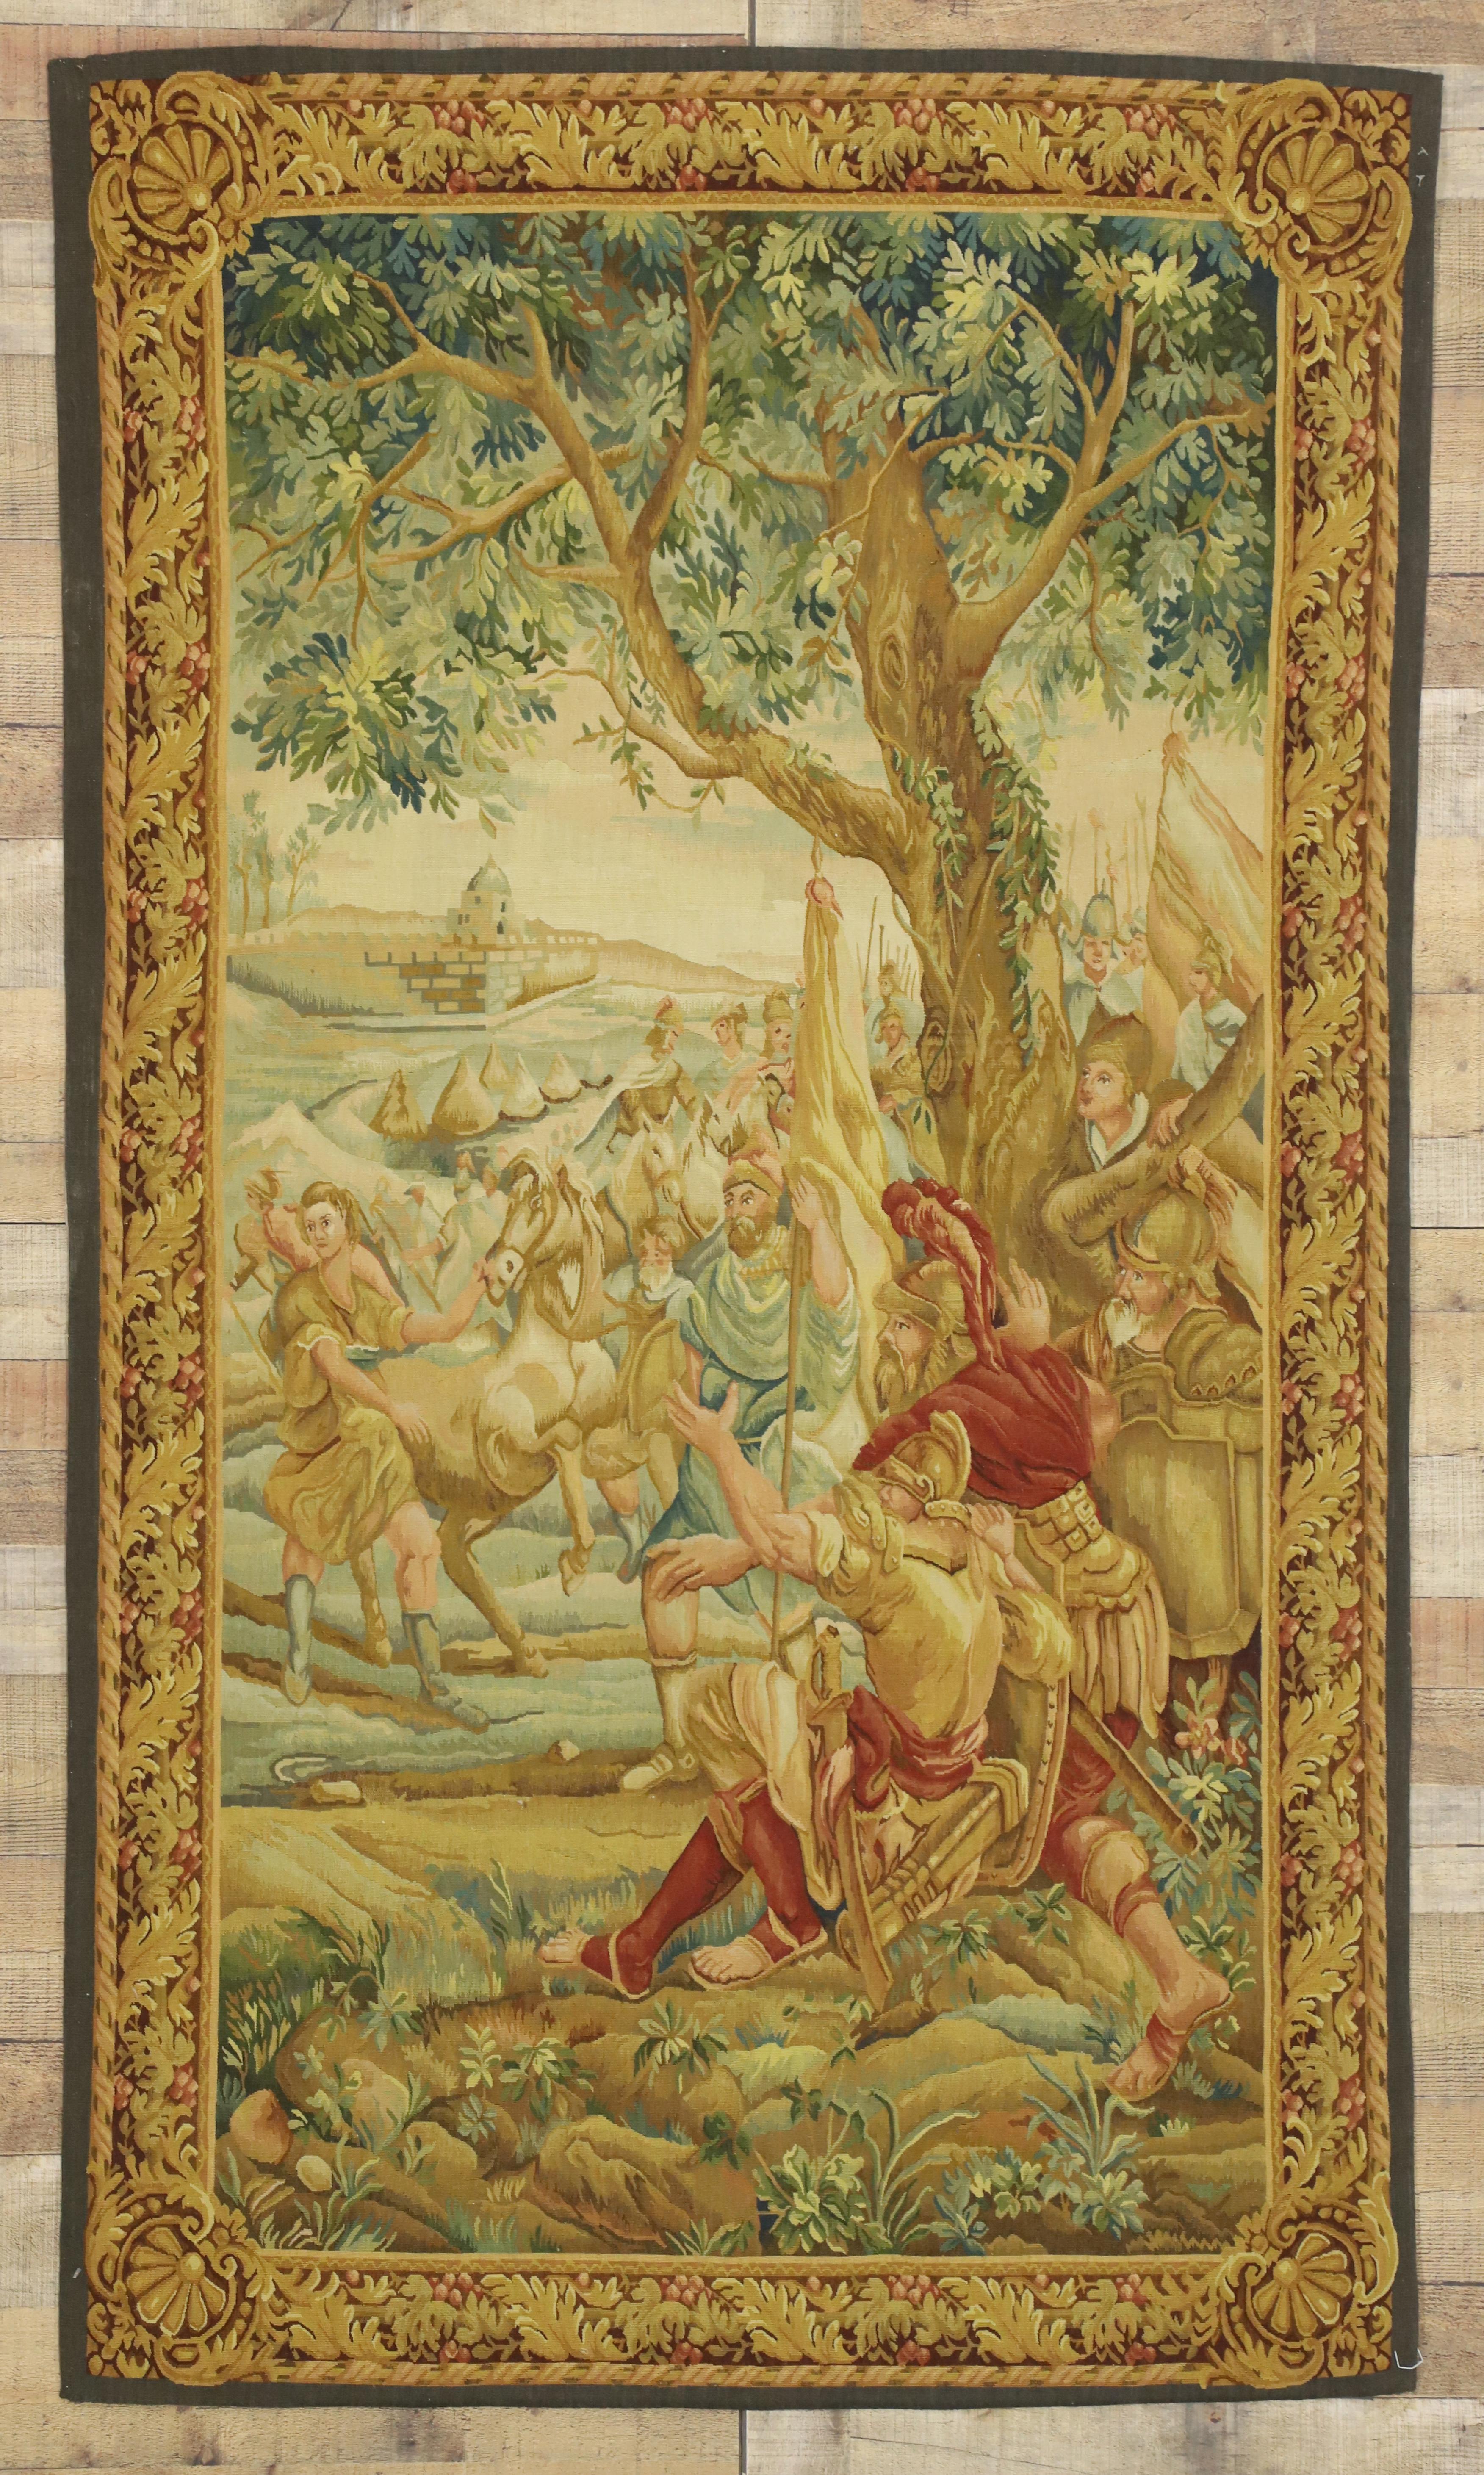 Contemporary Battle of the Teutoburg Forest Scene Tapestry with Medieval Style, Wall Hanging